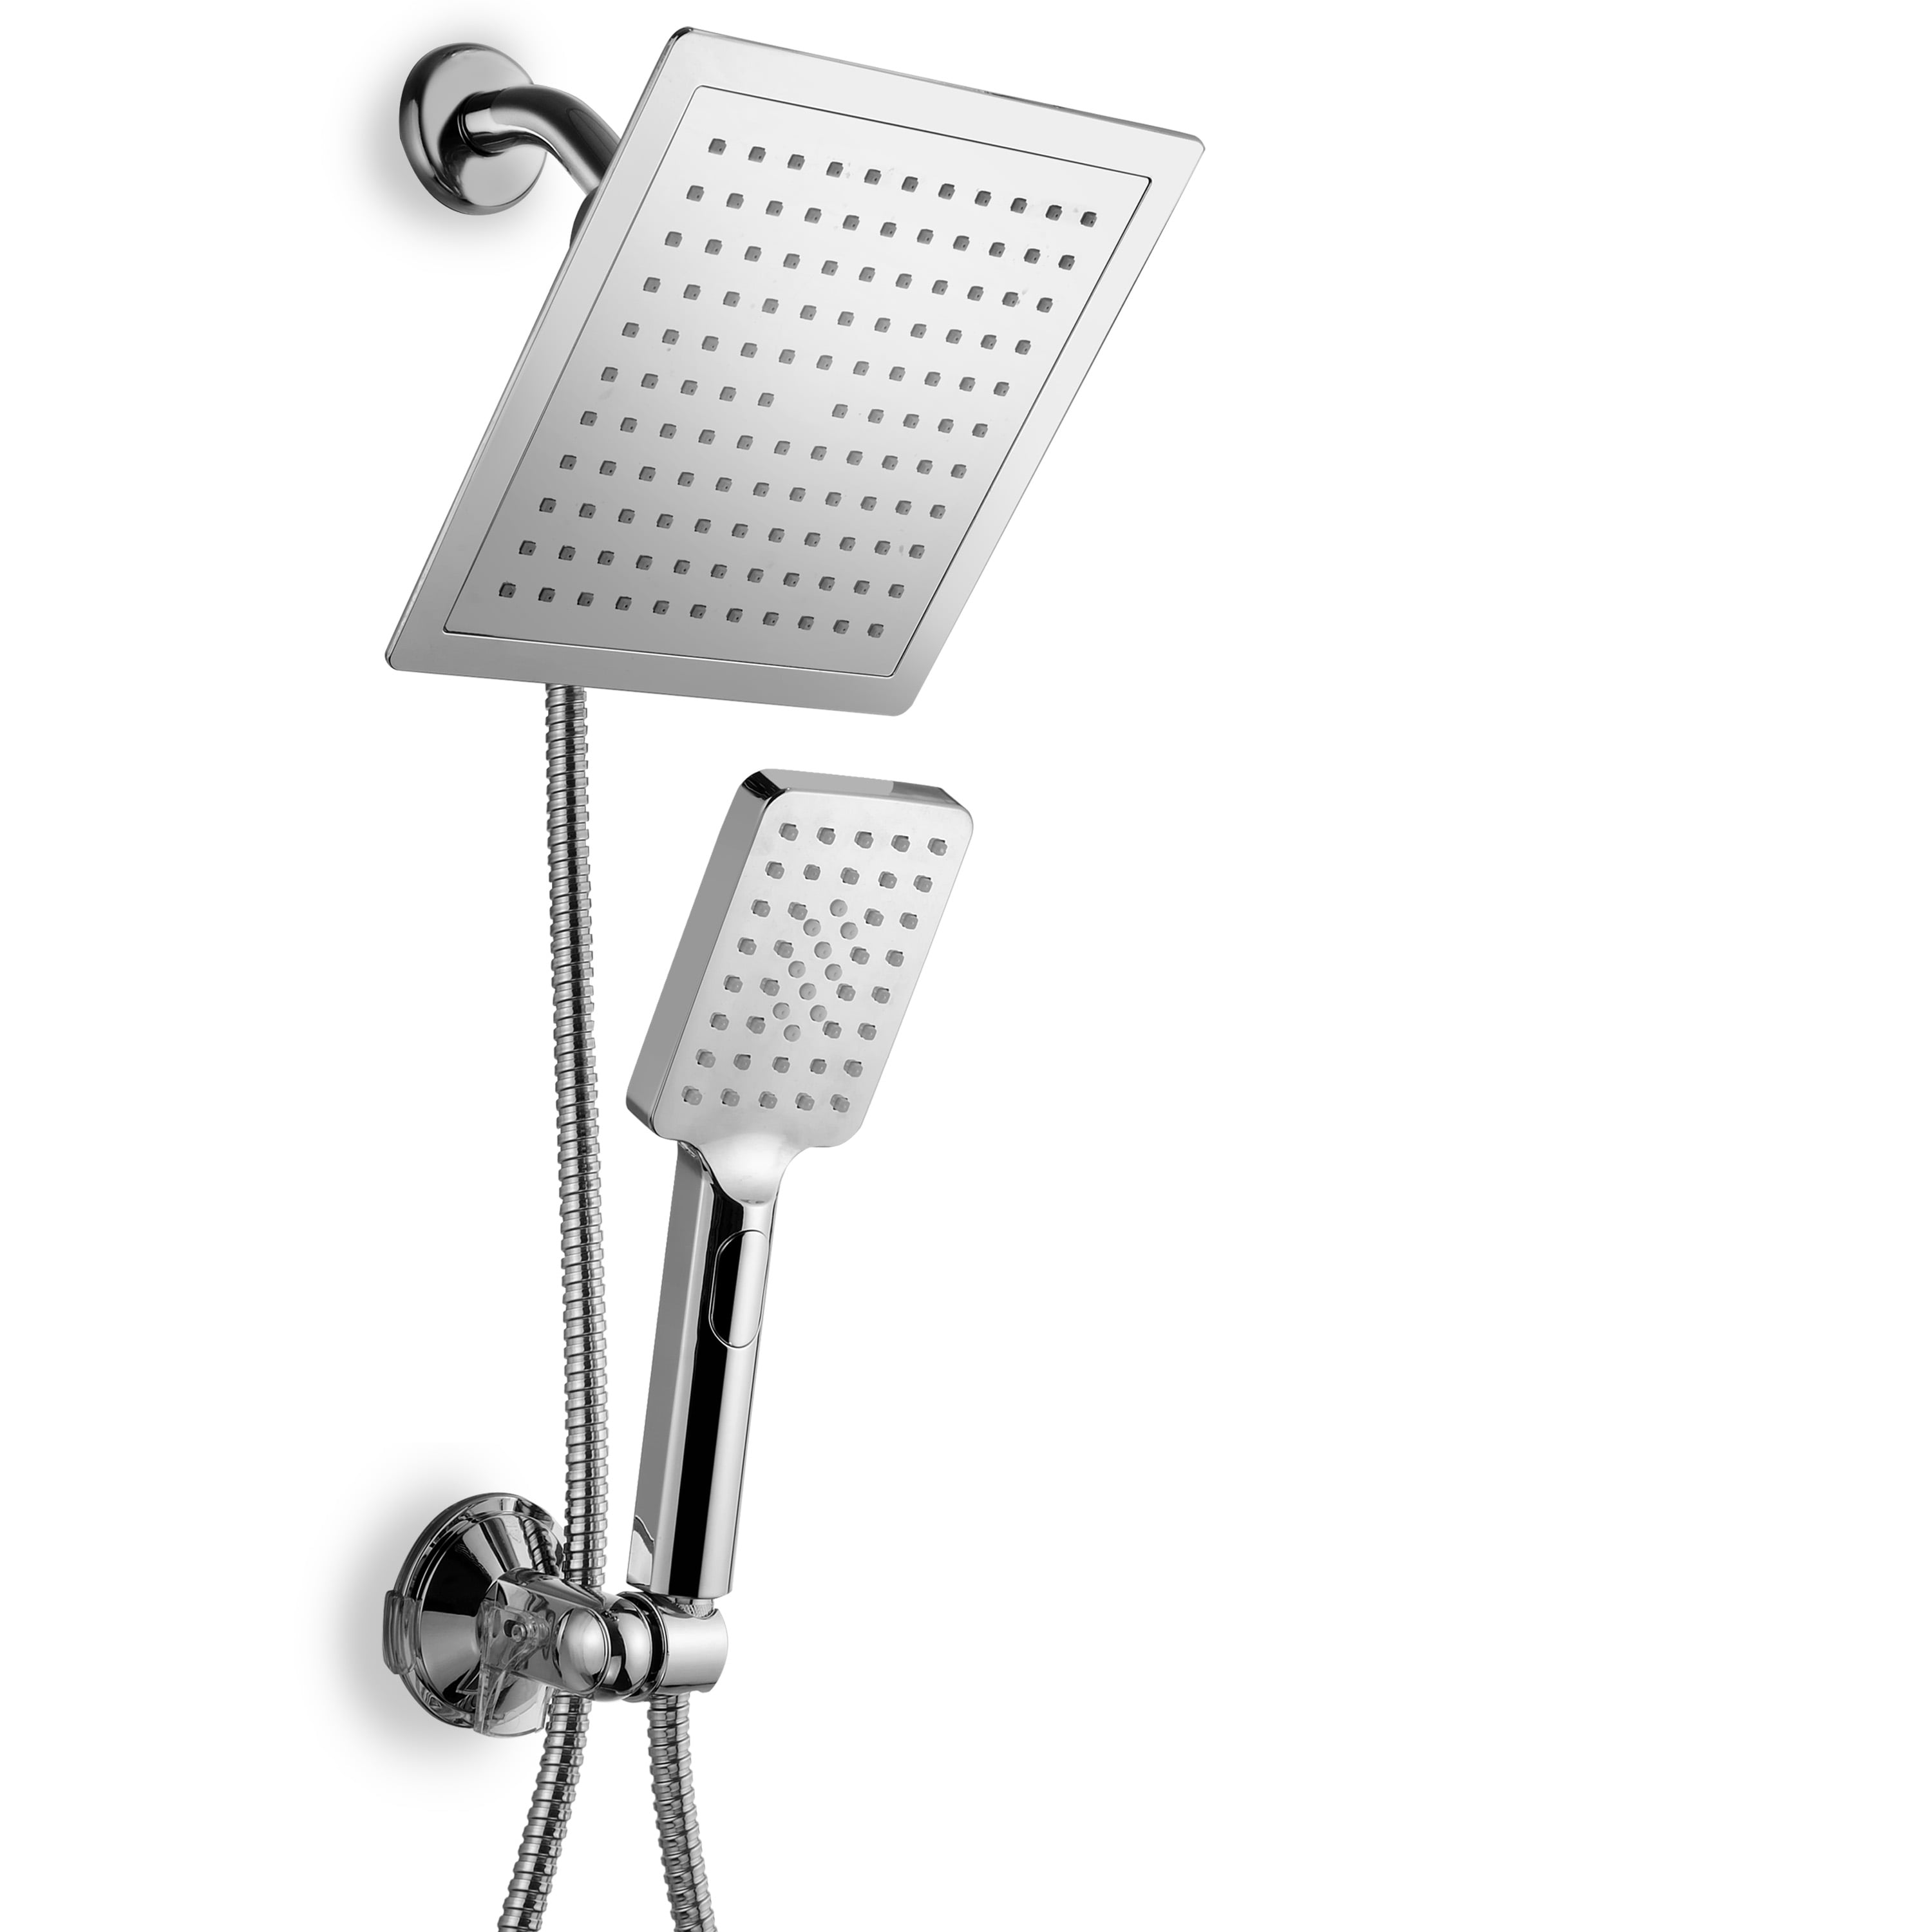 HotelSpa 1682 Giant 10 inch Rainfall Square Showerhead Stainless Steel for sale online 